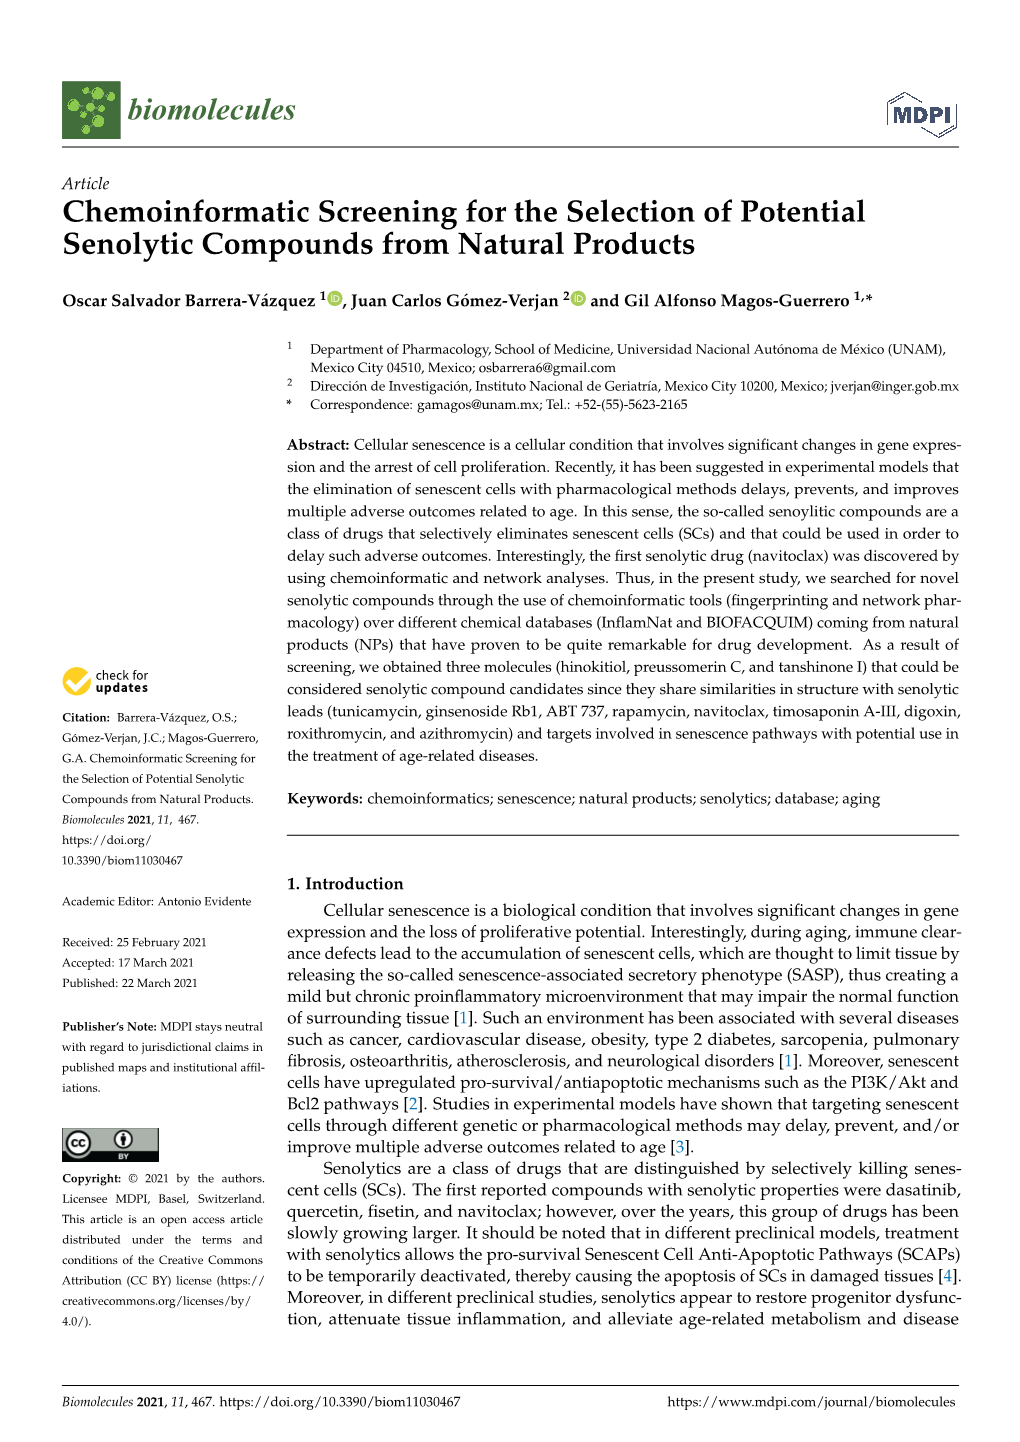 Chemoinformatic Screening for the Selection of Potential Senolytic Compounds from Natural Products